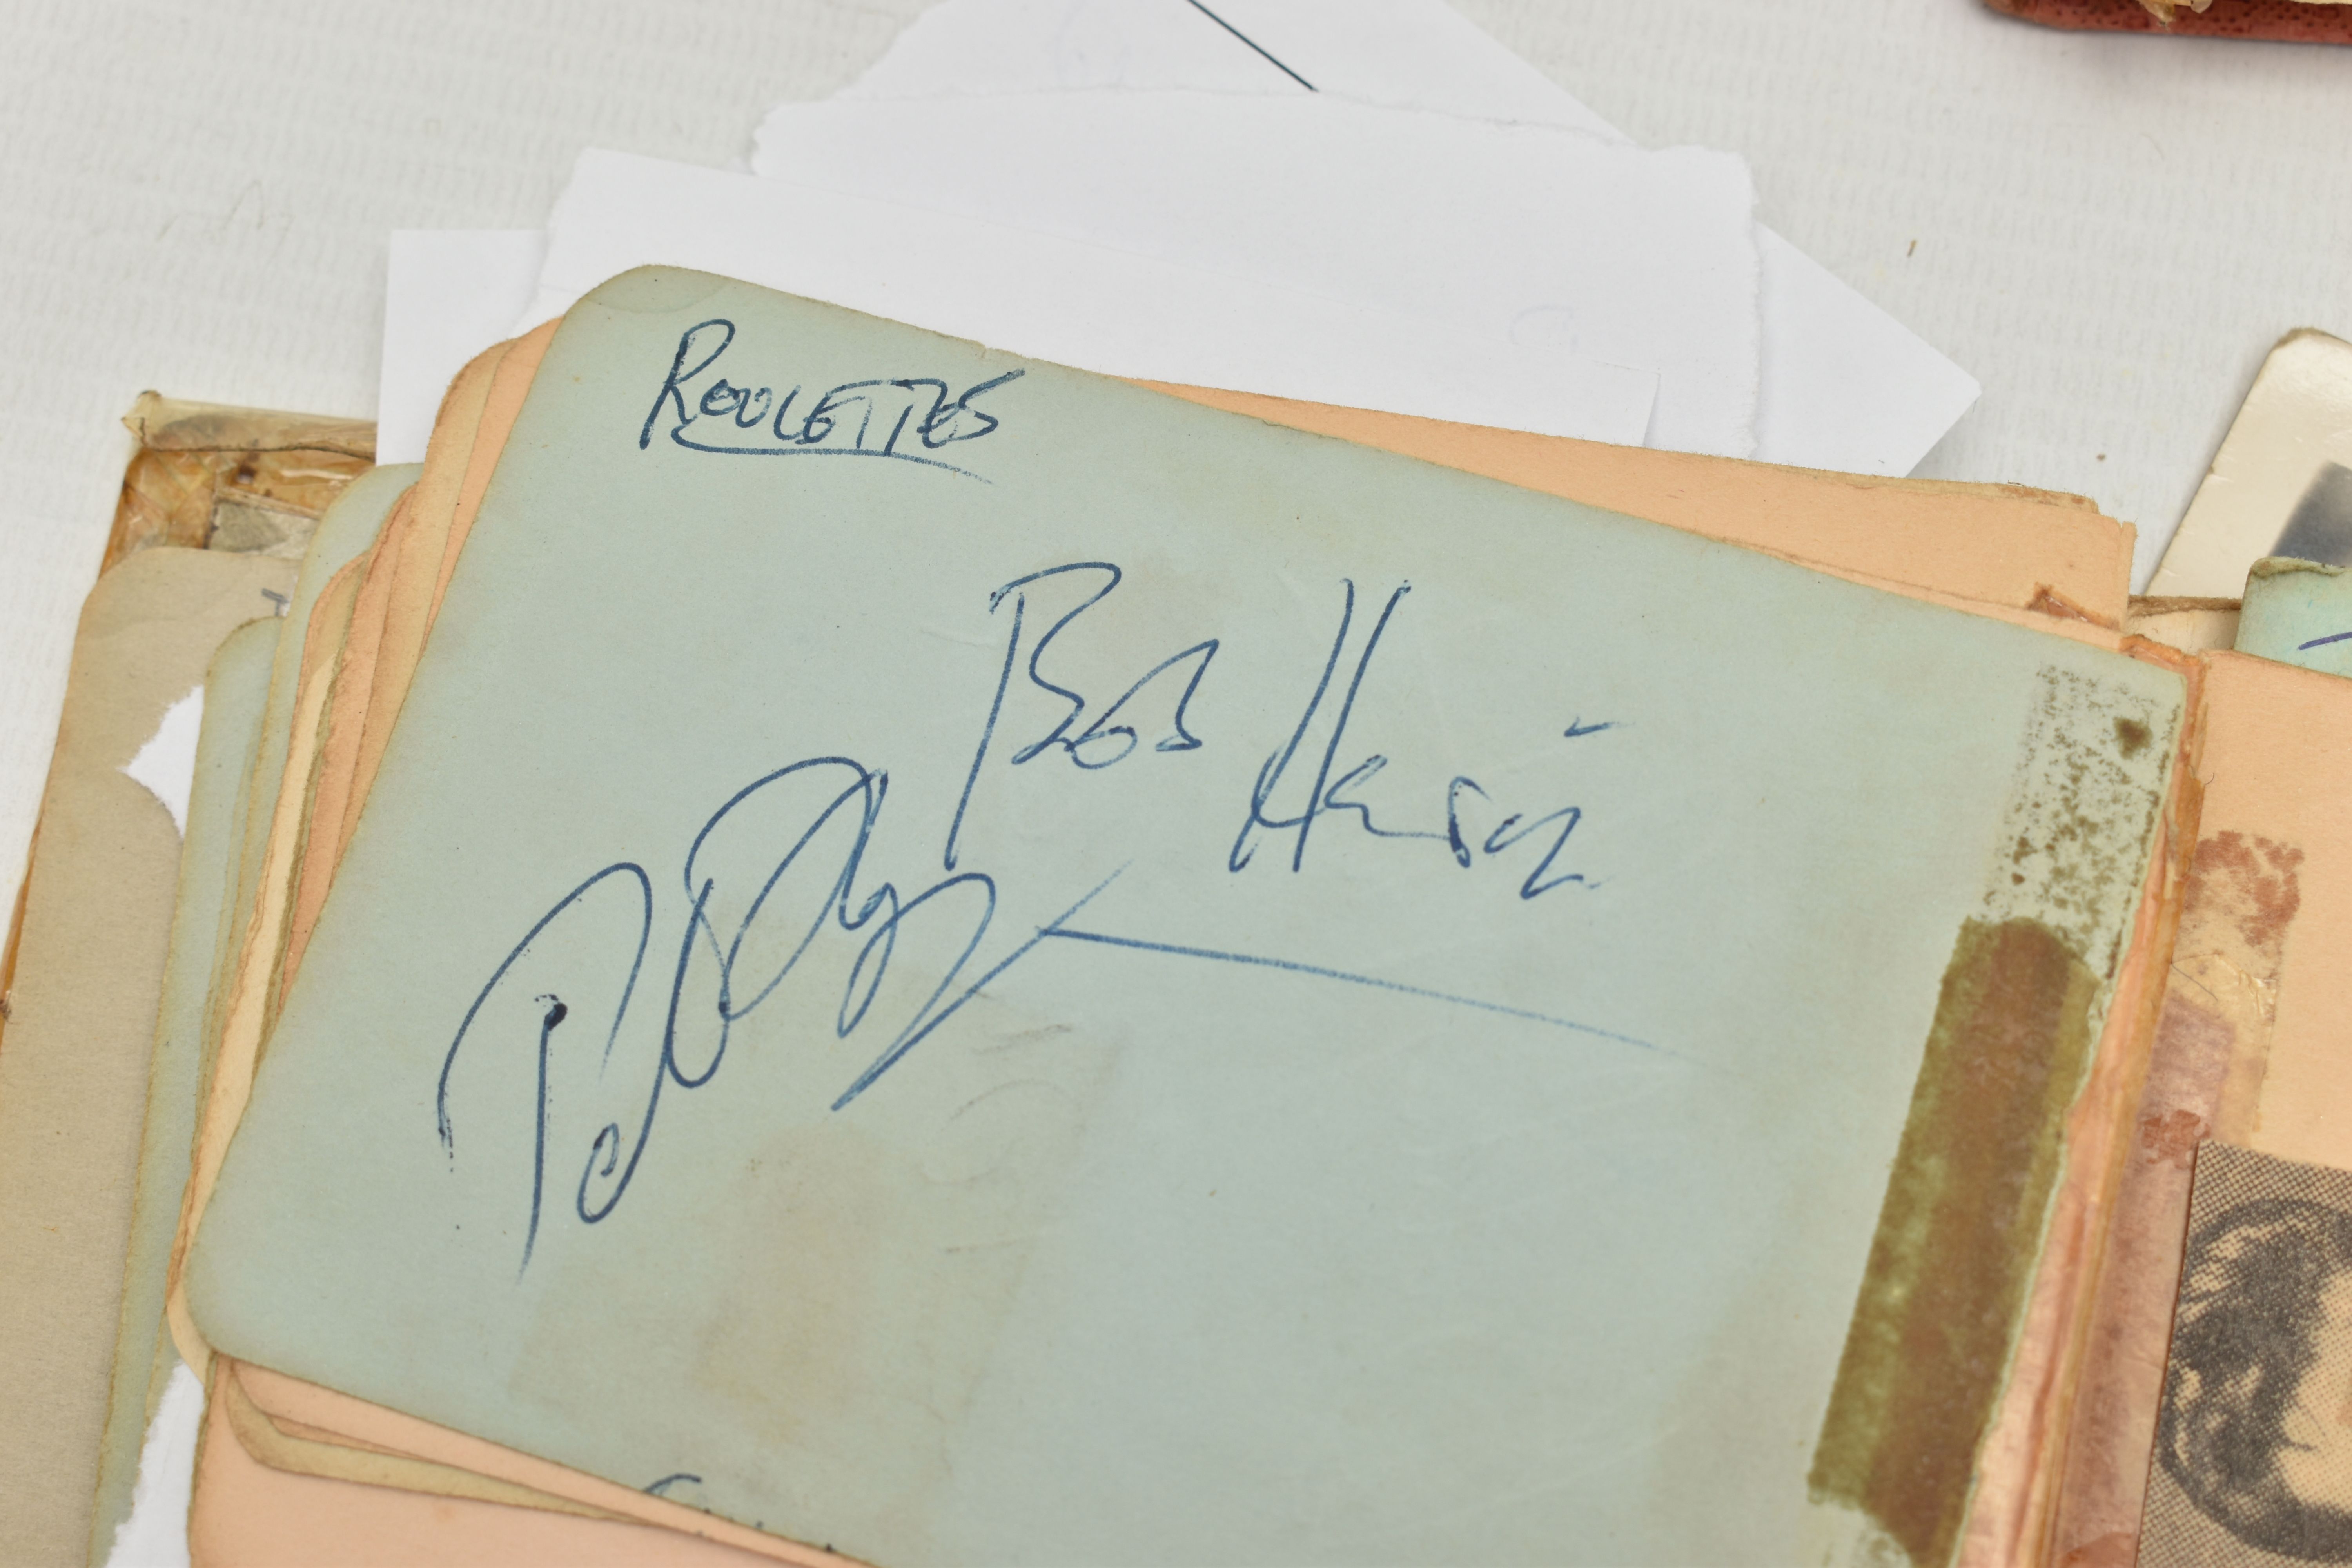 THE BEATLES AUTOGRAPHS, two autograph albums and two photographs, the Woburn Abbey autograph book is - Image 20 of 22